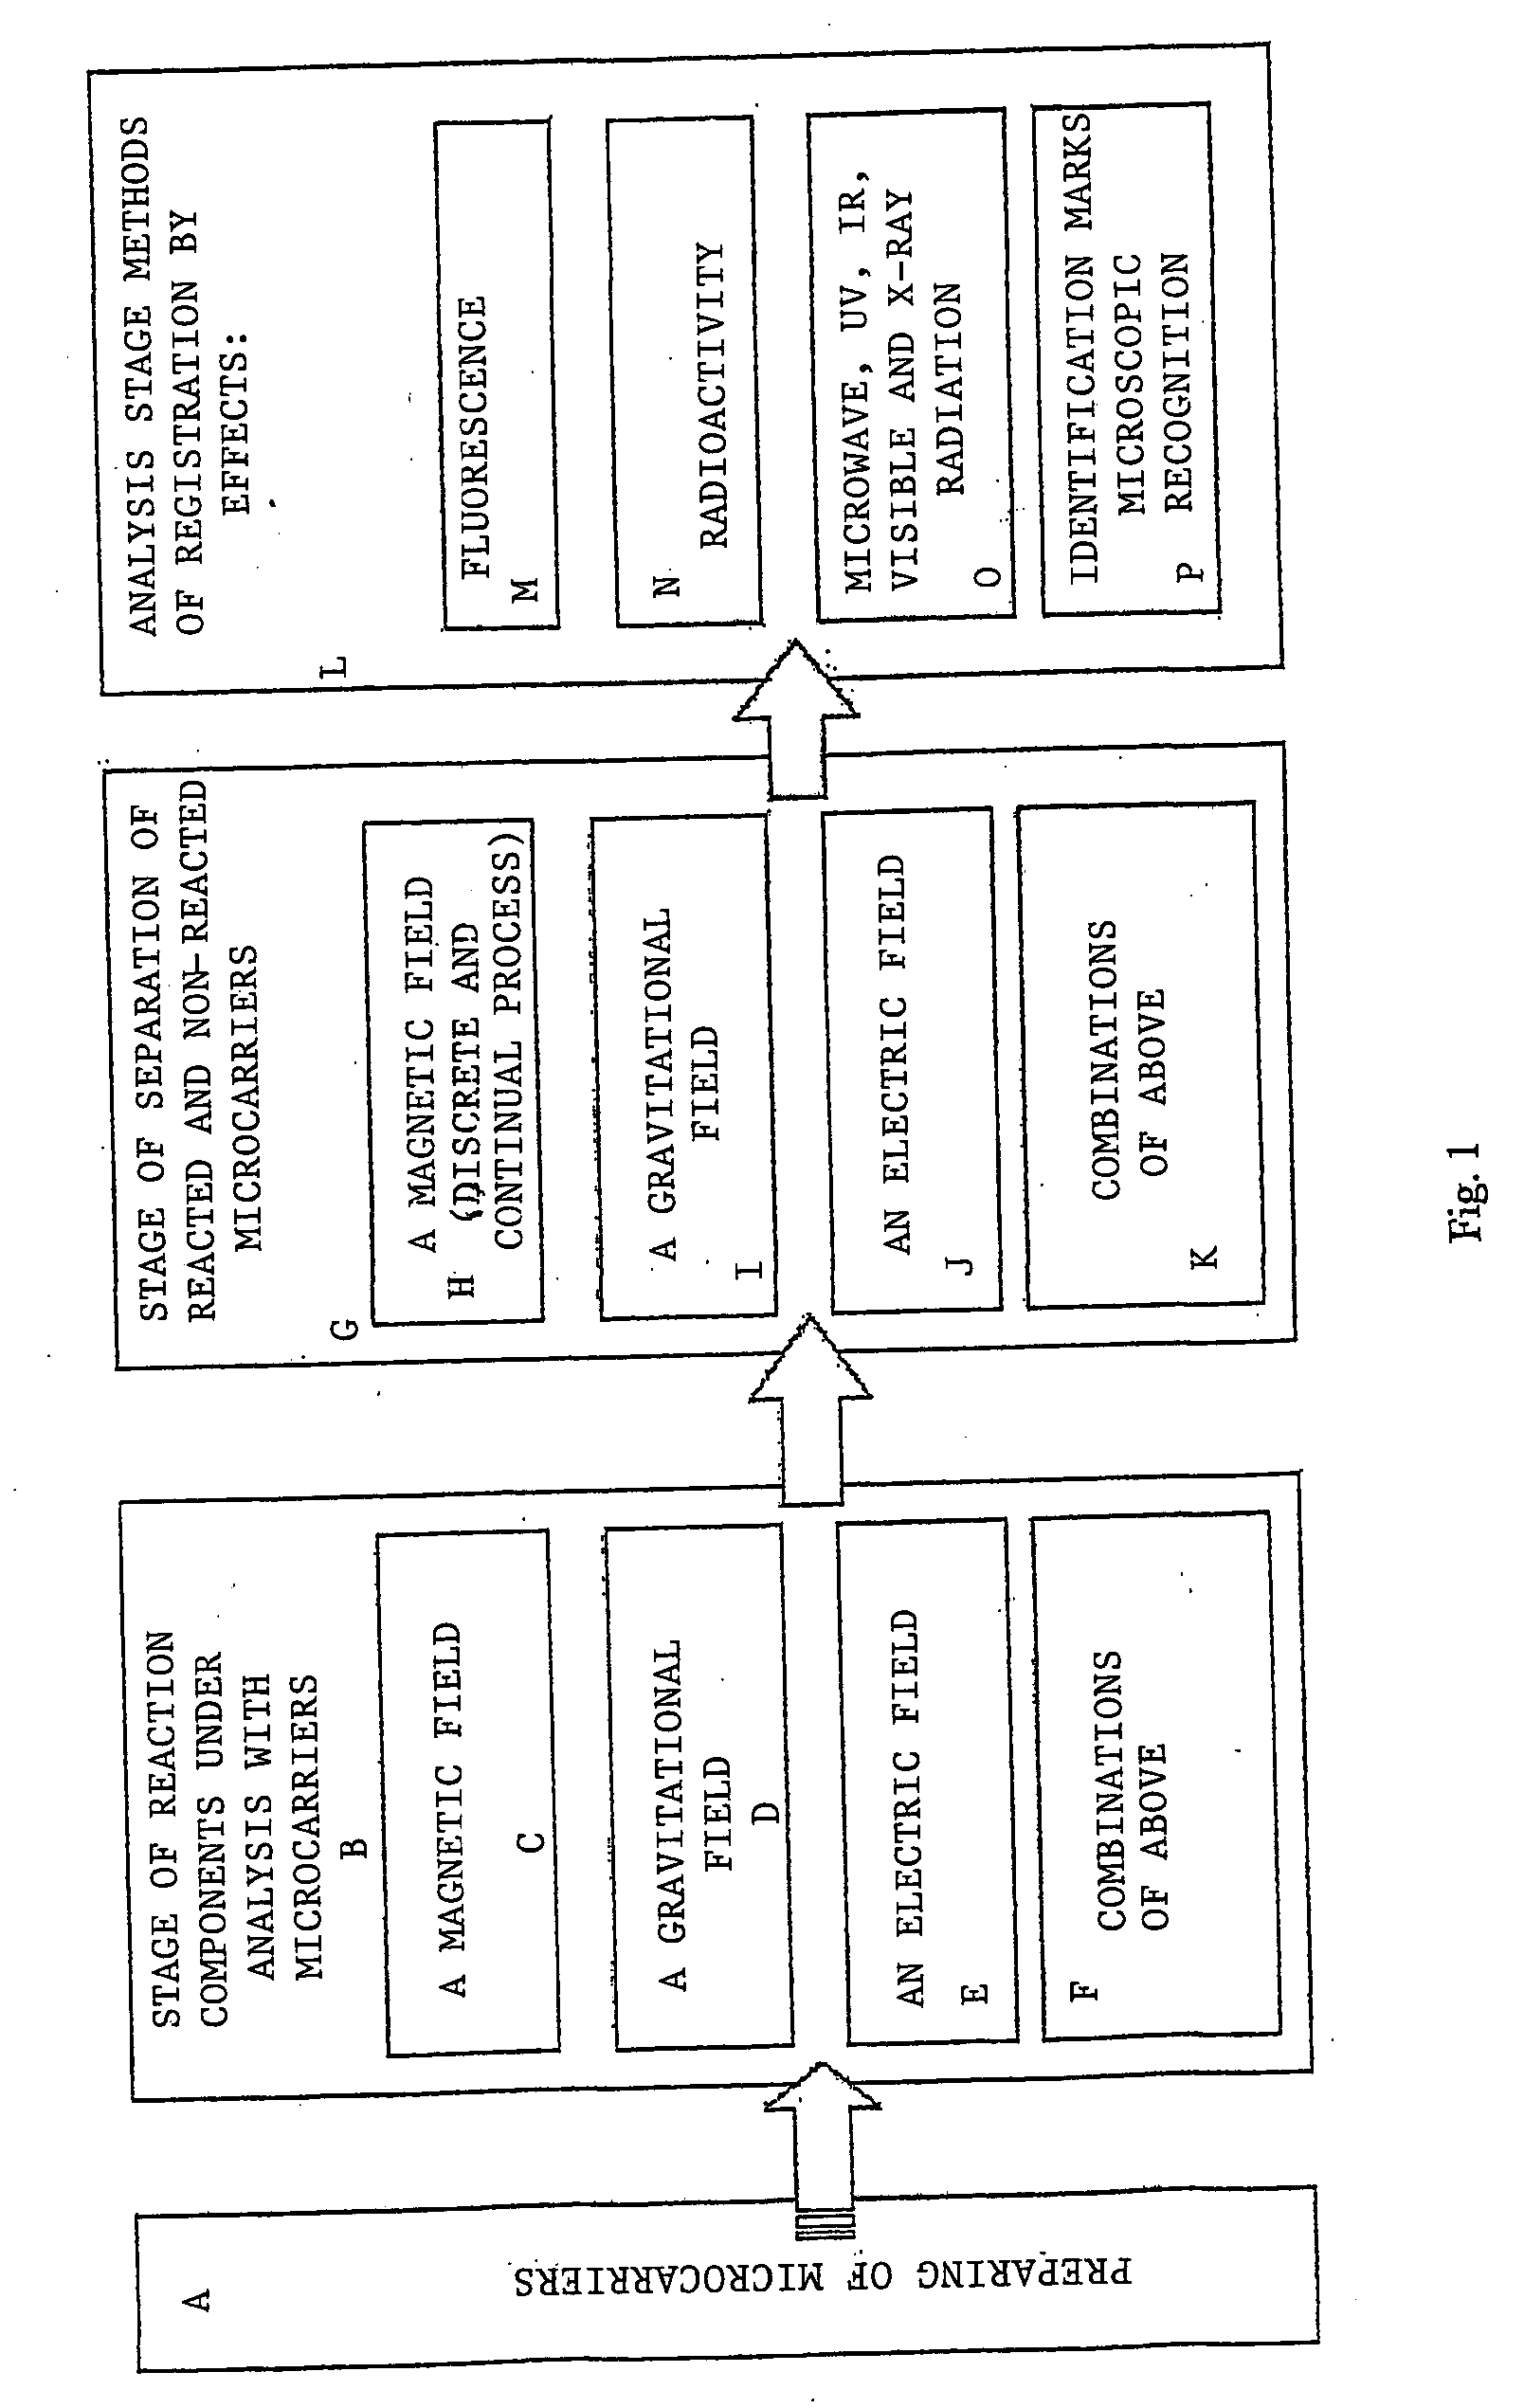 Method and device for simultaneous detection of multiple components in a mixture